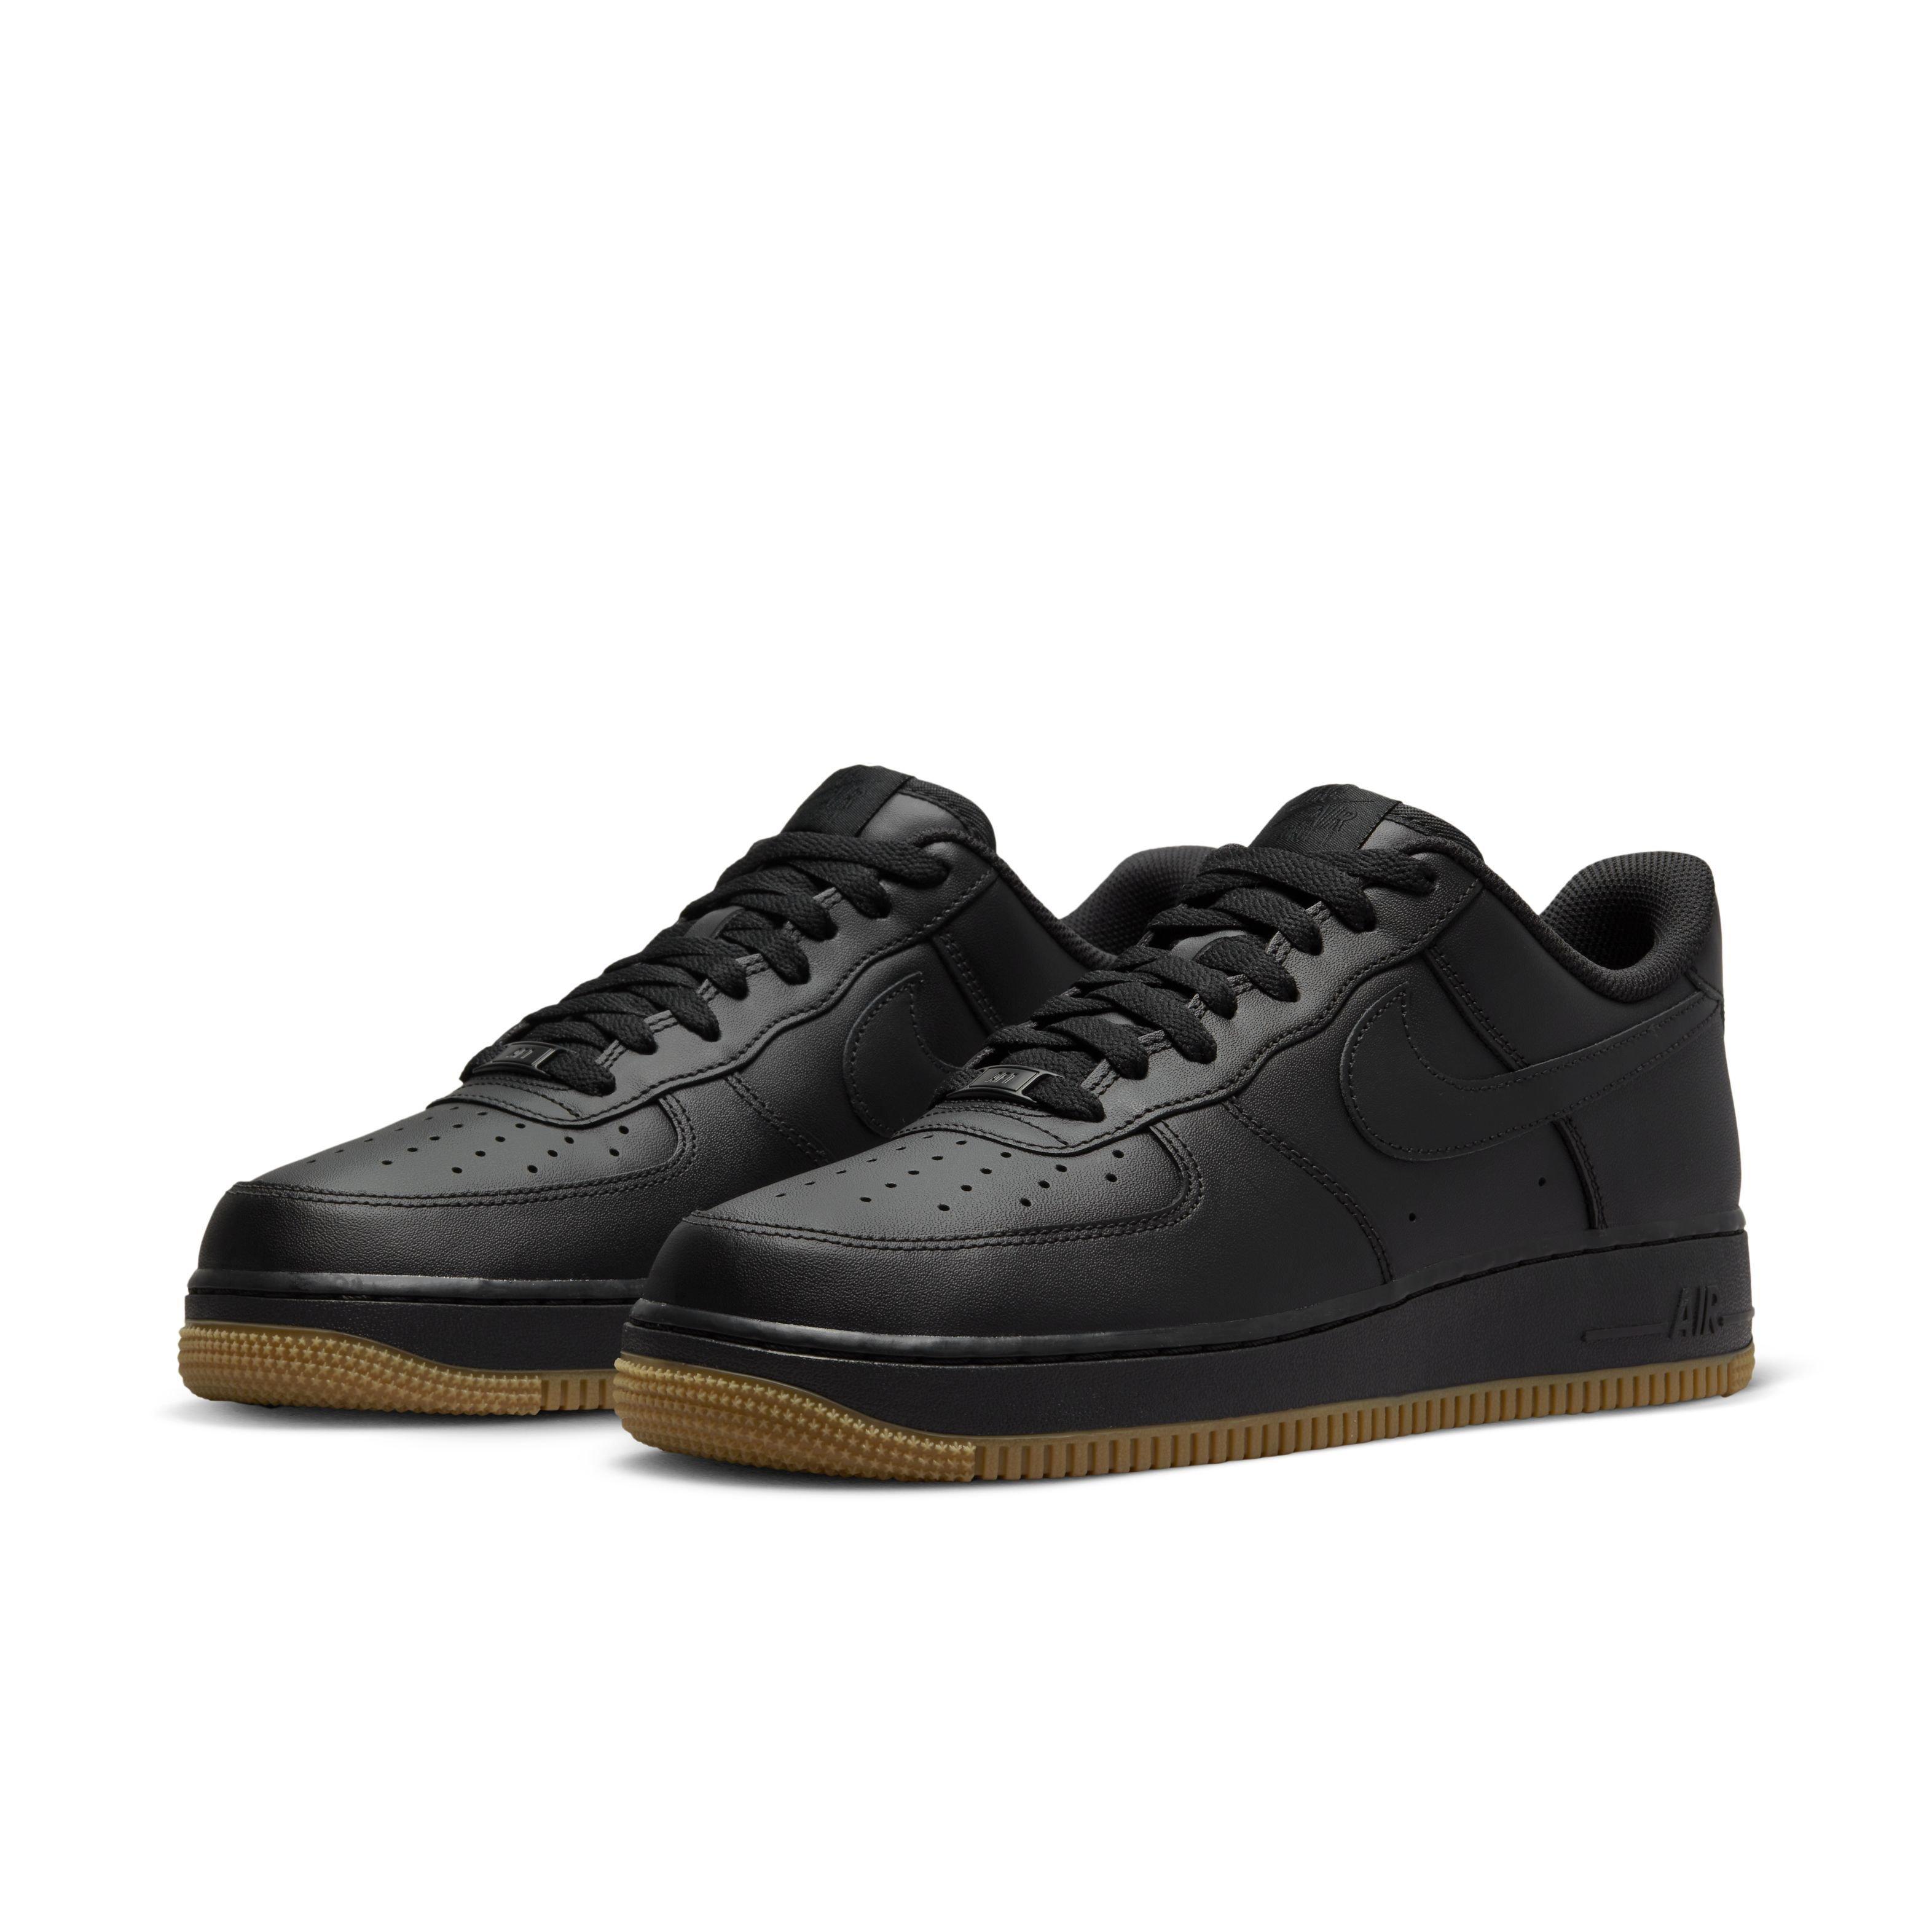 This Nike Air Force 1 '07 Black Gum Is A Perfect Classic •